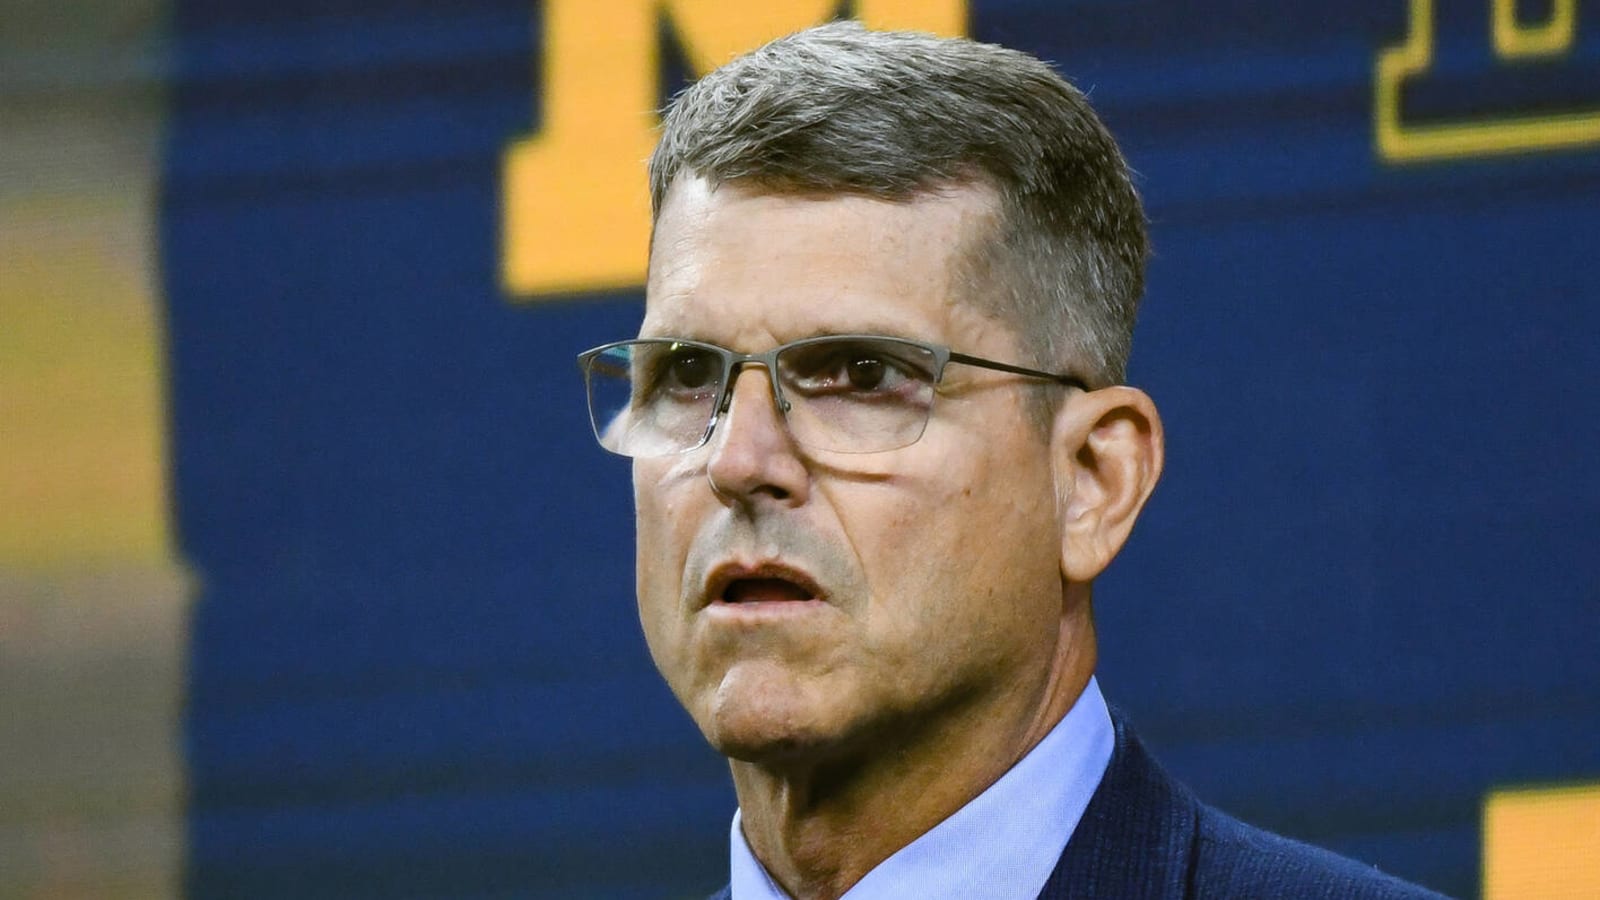 NCAA's remarks indicate it wants to drop hammer on Harbaugh